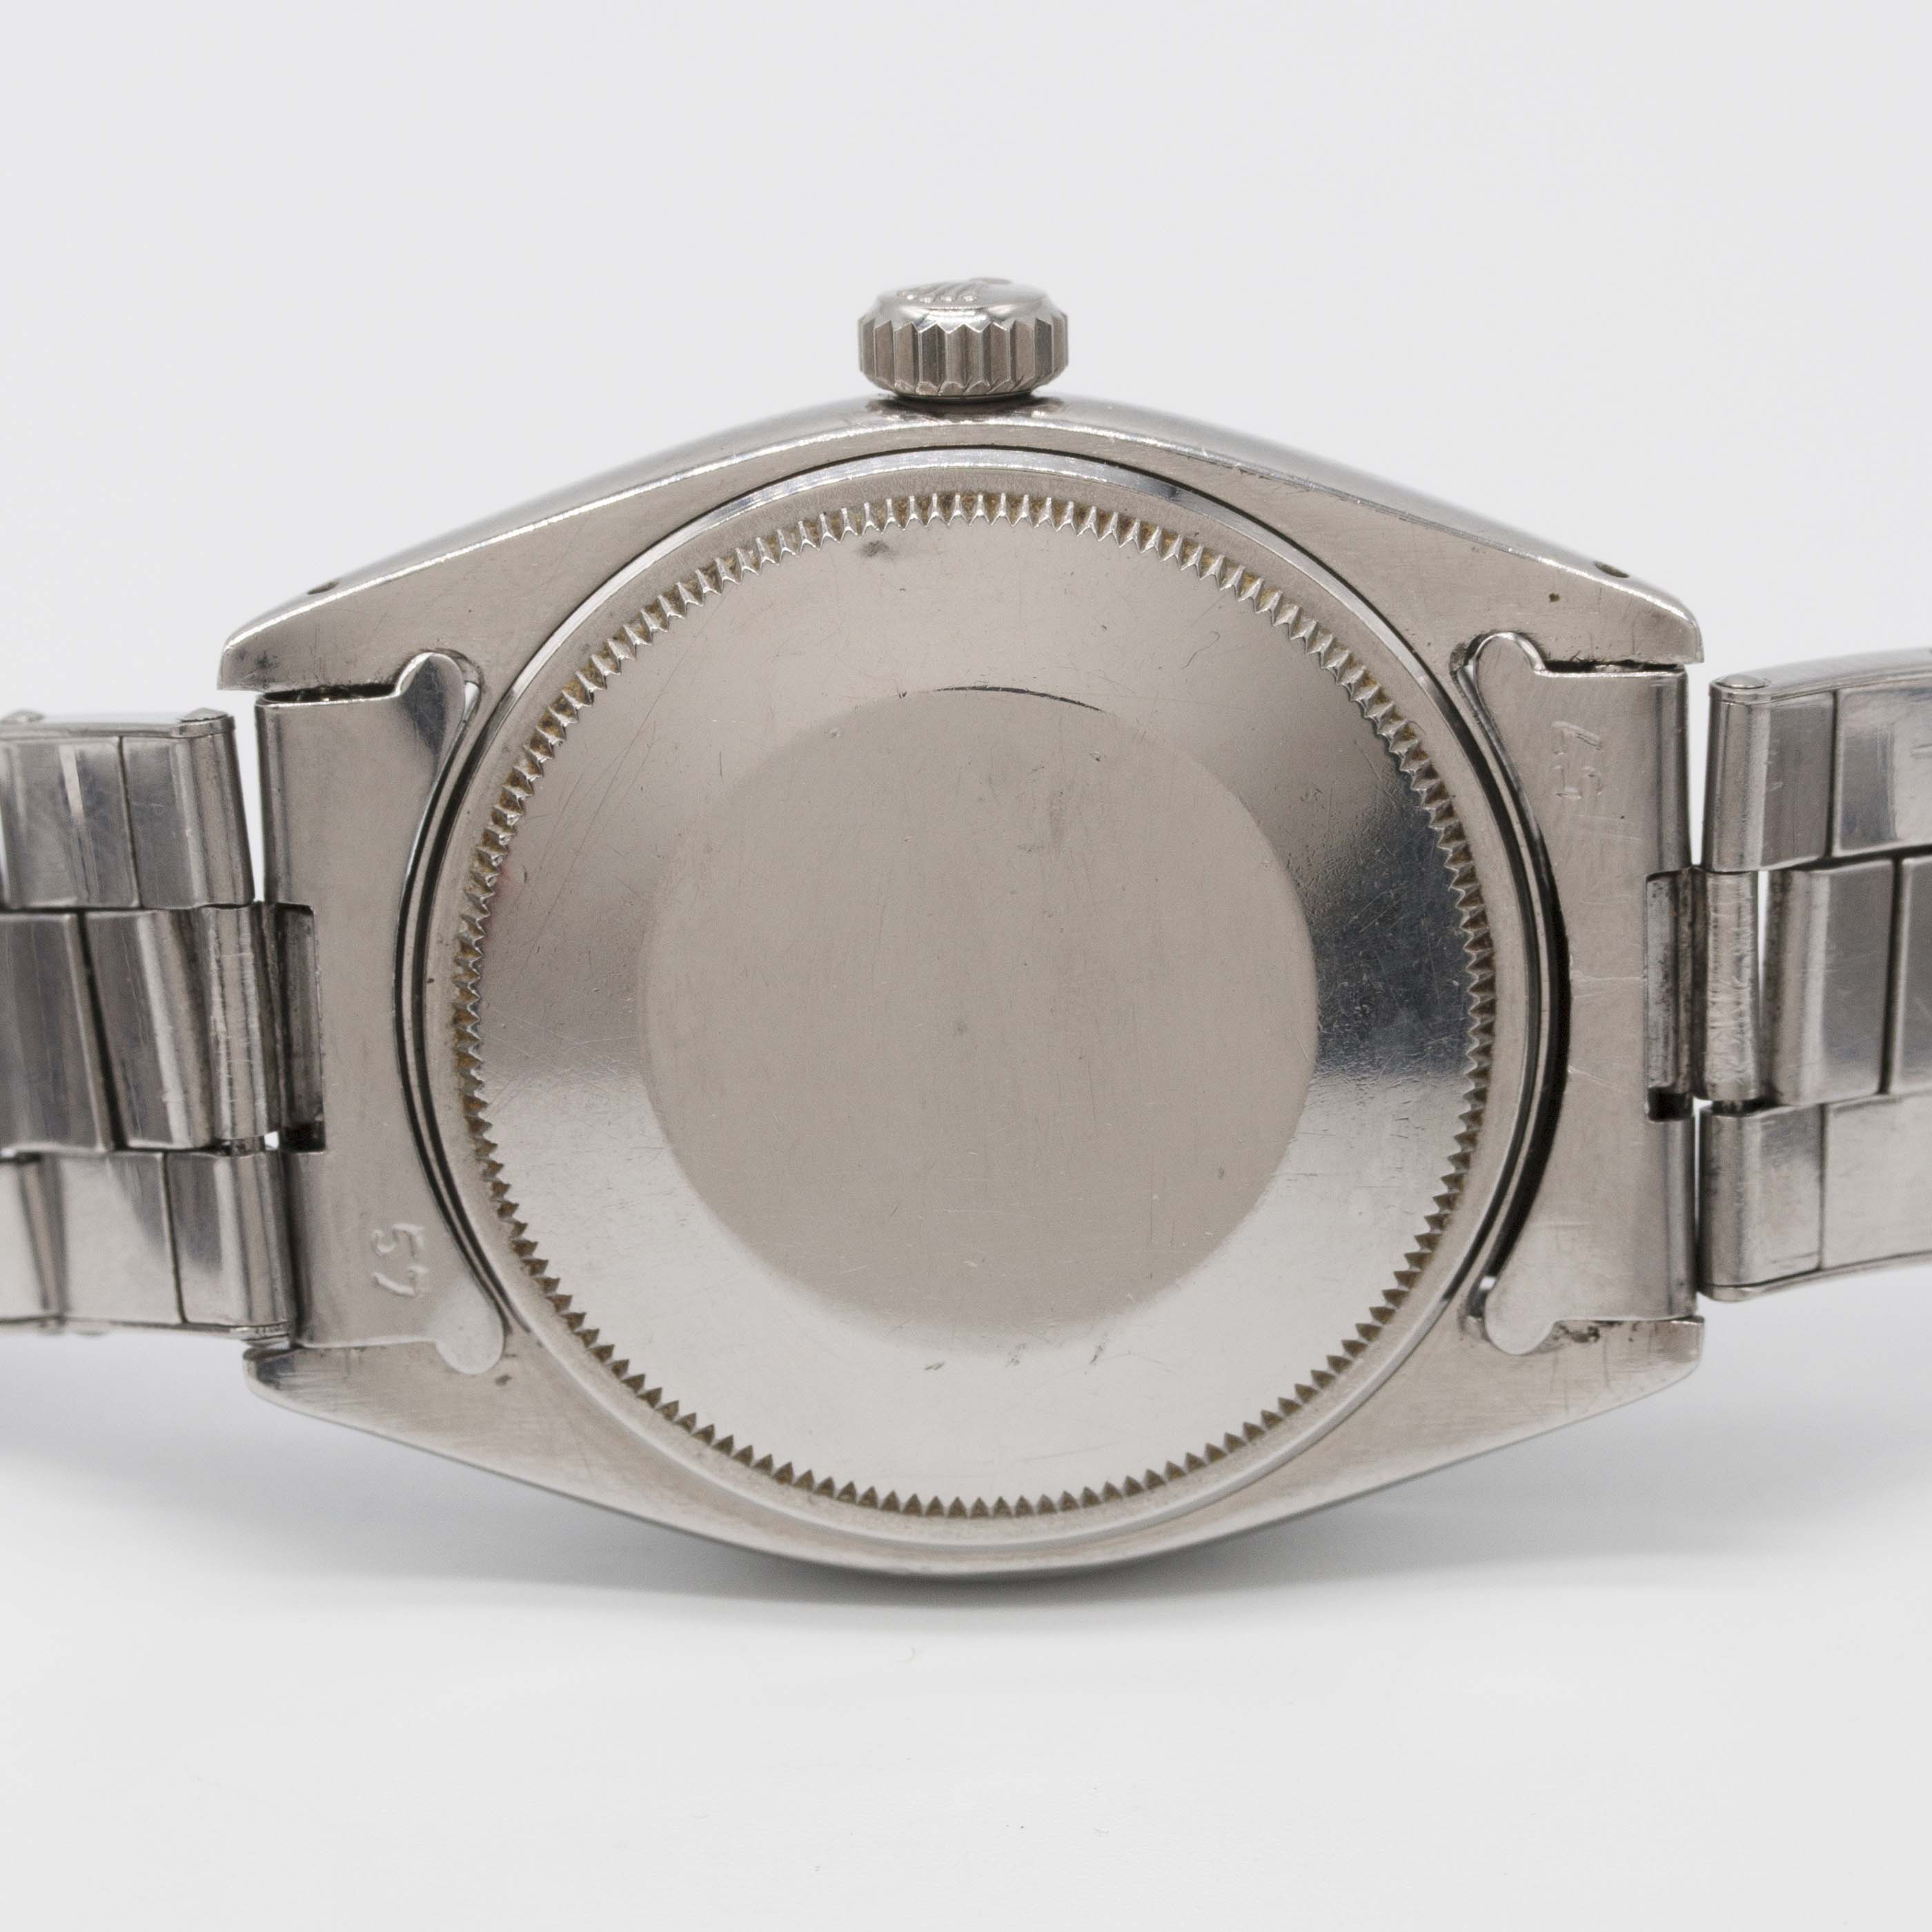 A GENTLEMAN'S STAINLESS STEEL ROLEX OYSTER PERPETUAL DATE BRACELET WATCH CIRCA 1961, REF. 1500 GLOSS - Image 7 of 12